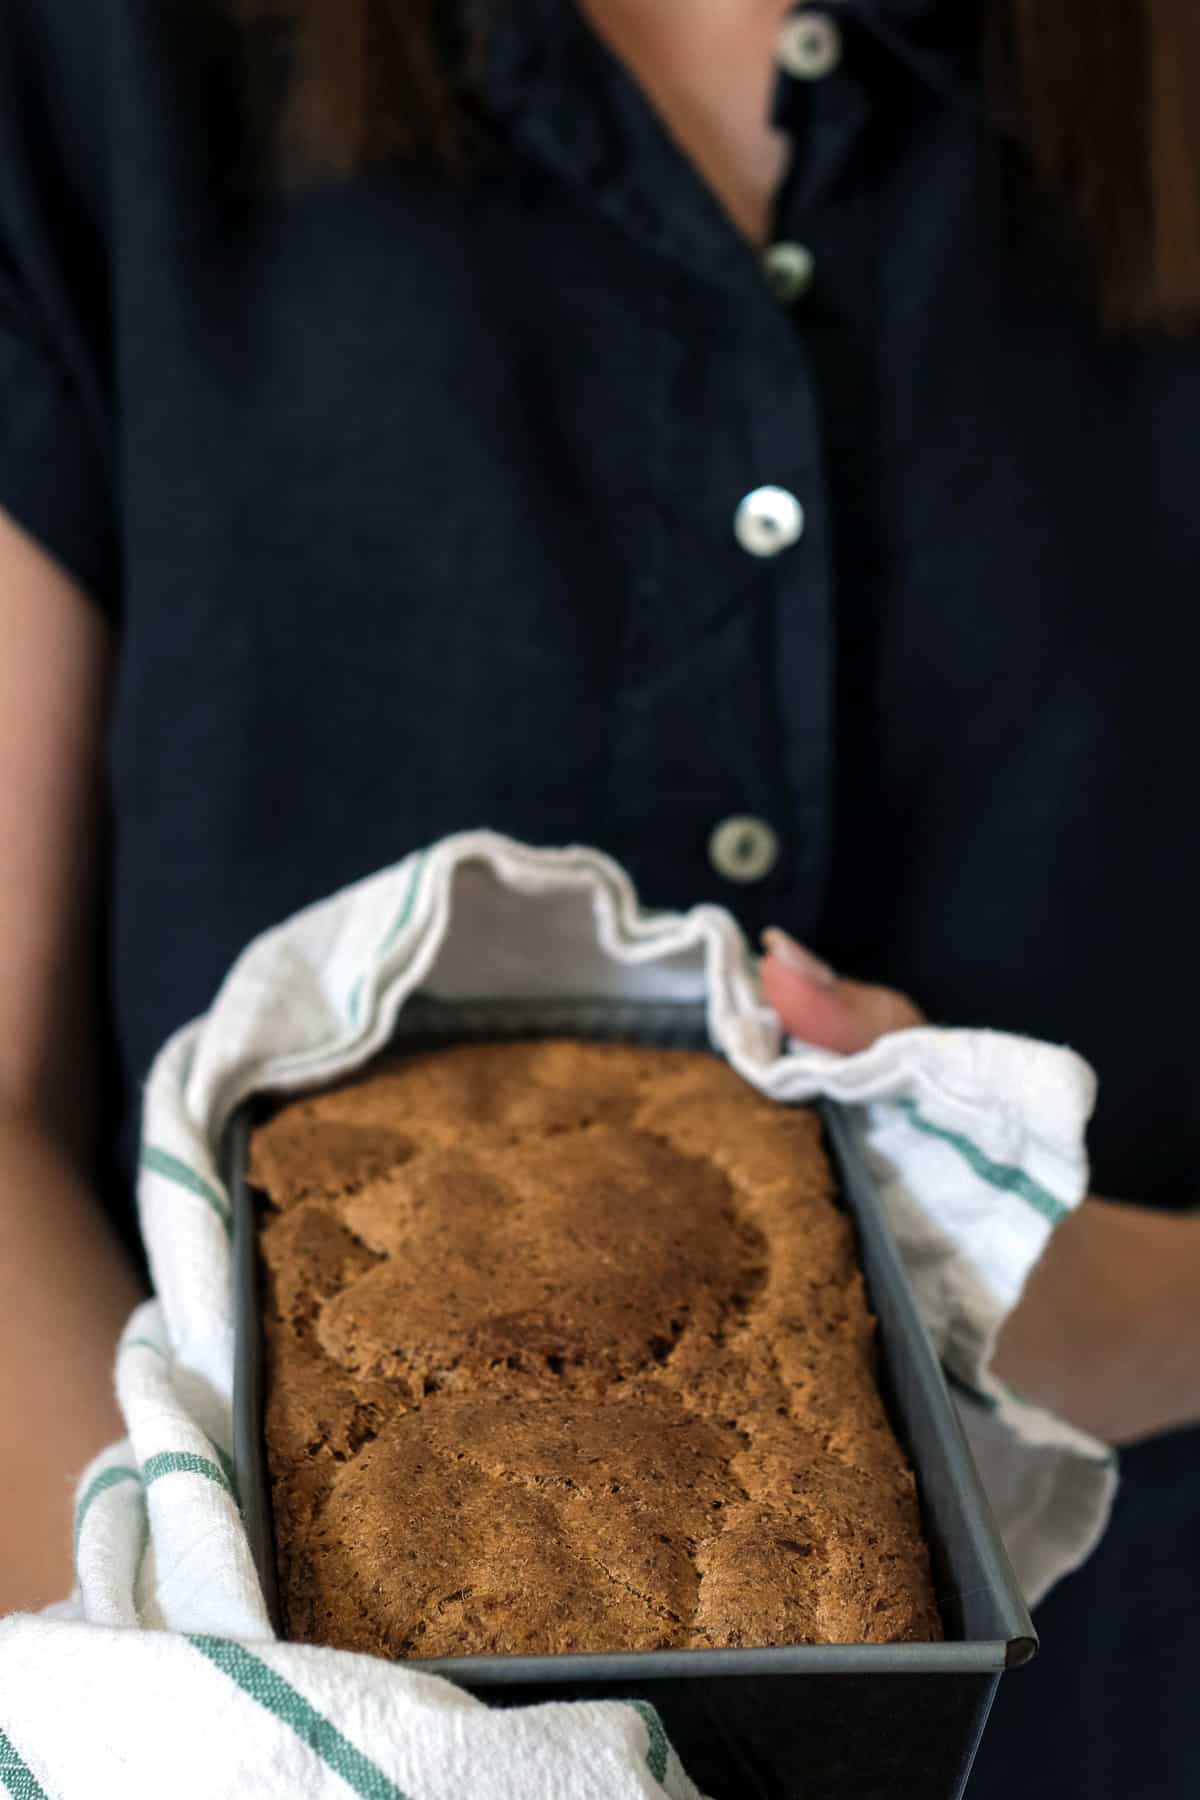 Holding a hot baking dish with spelt bread